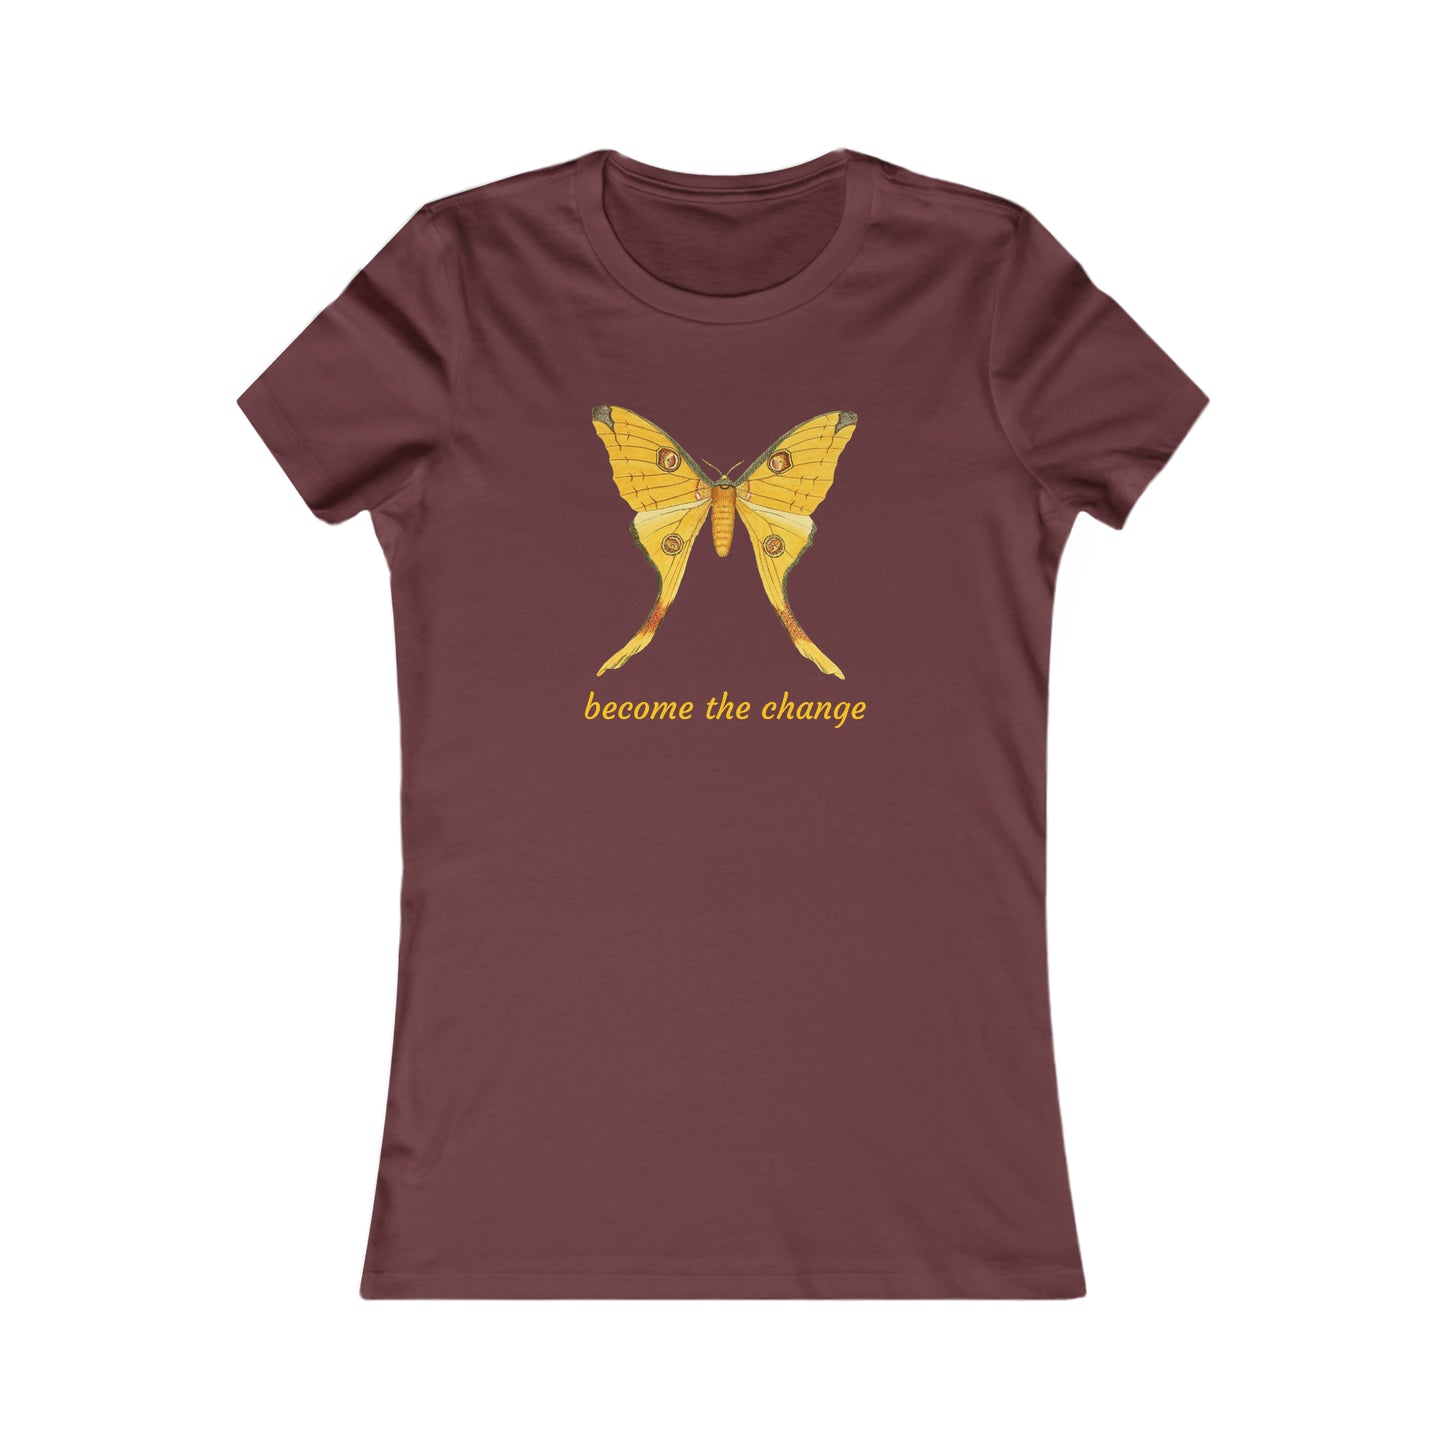 A beautiful butterfly with “become the change” message on this Women's Favorite Tee. Slim fit so please check the size table.